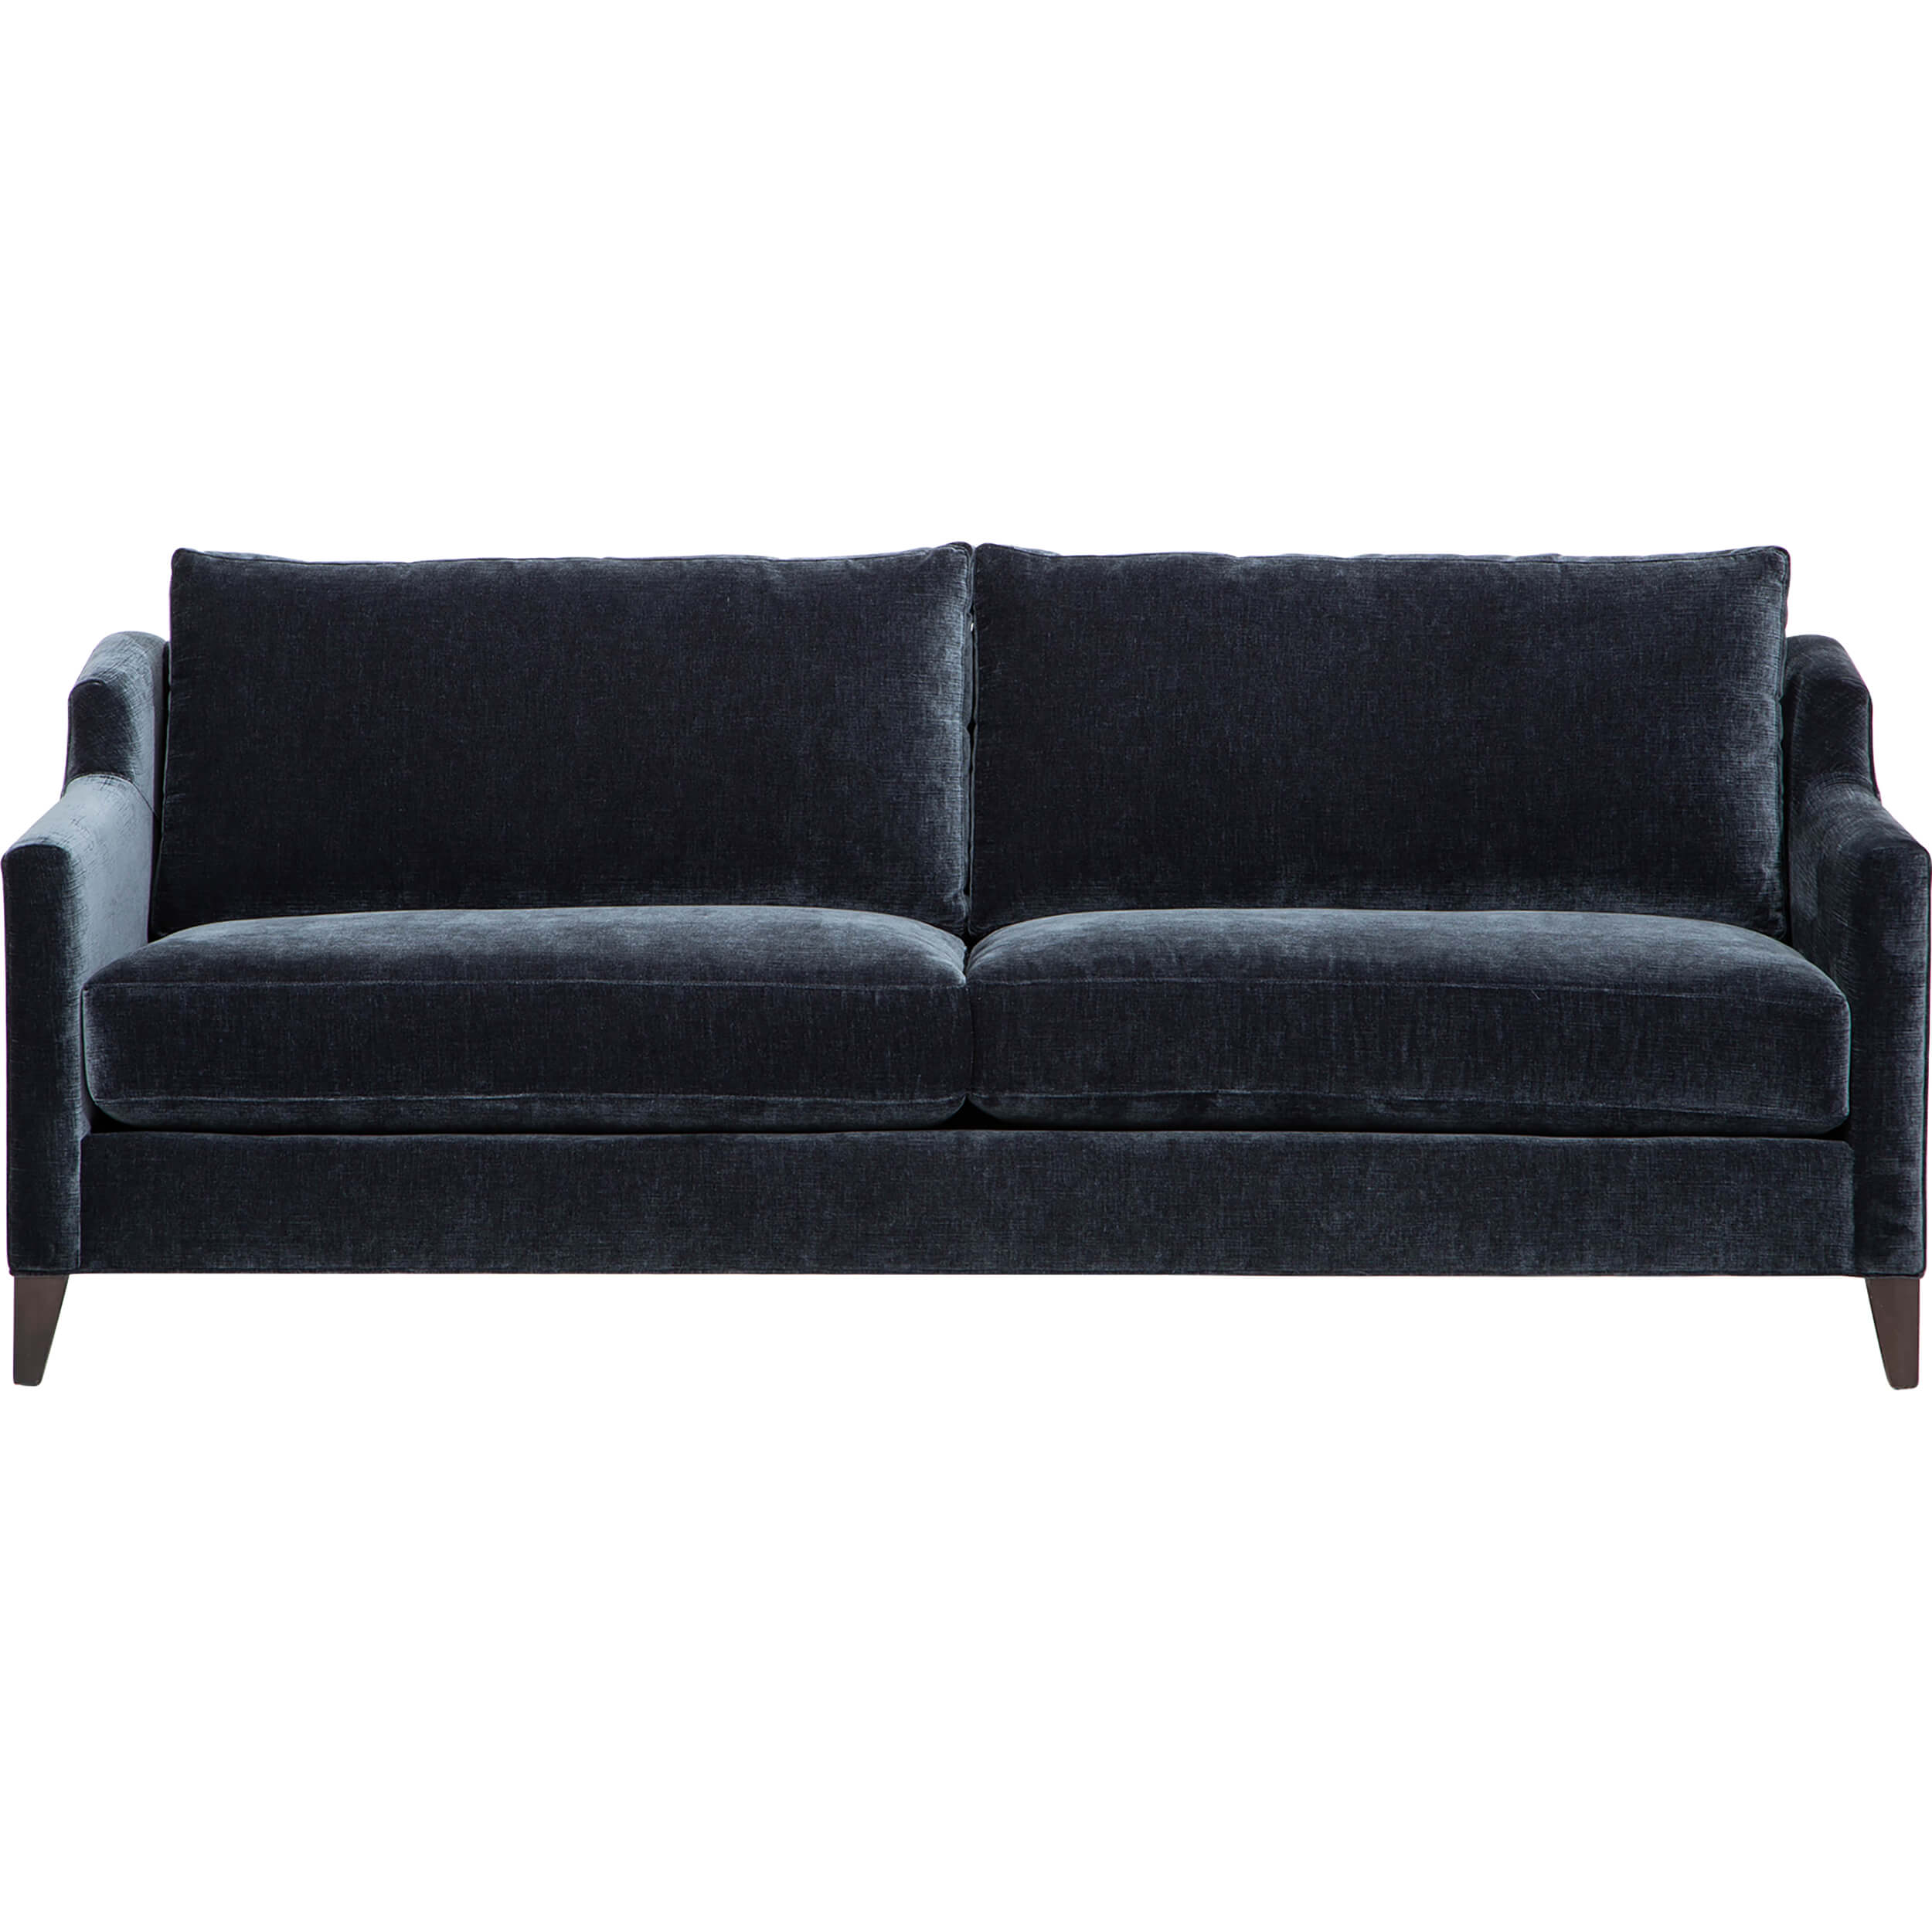 Image of Colette Sofa, Vickie Night